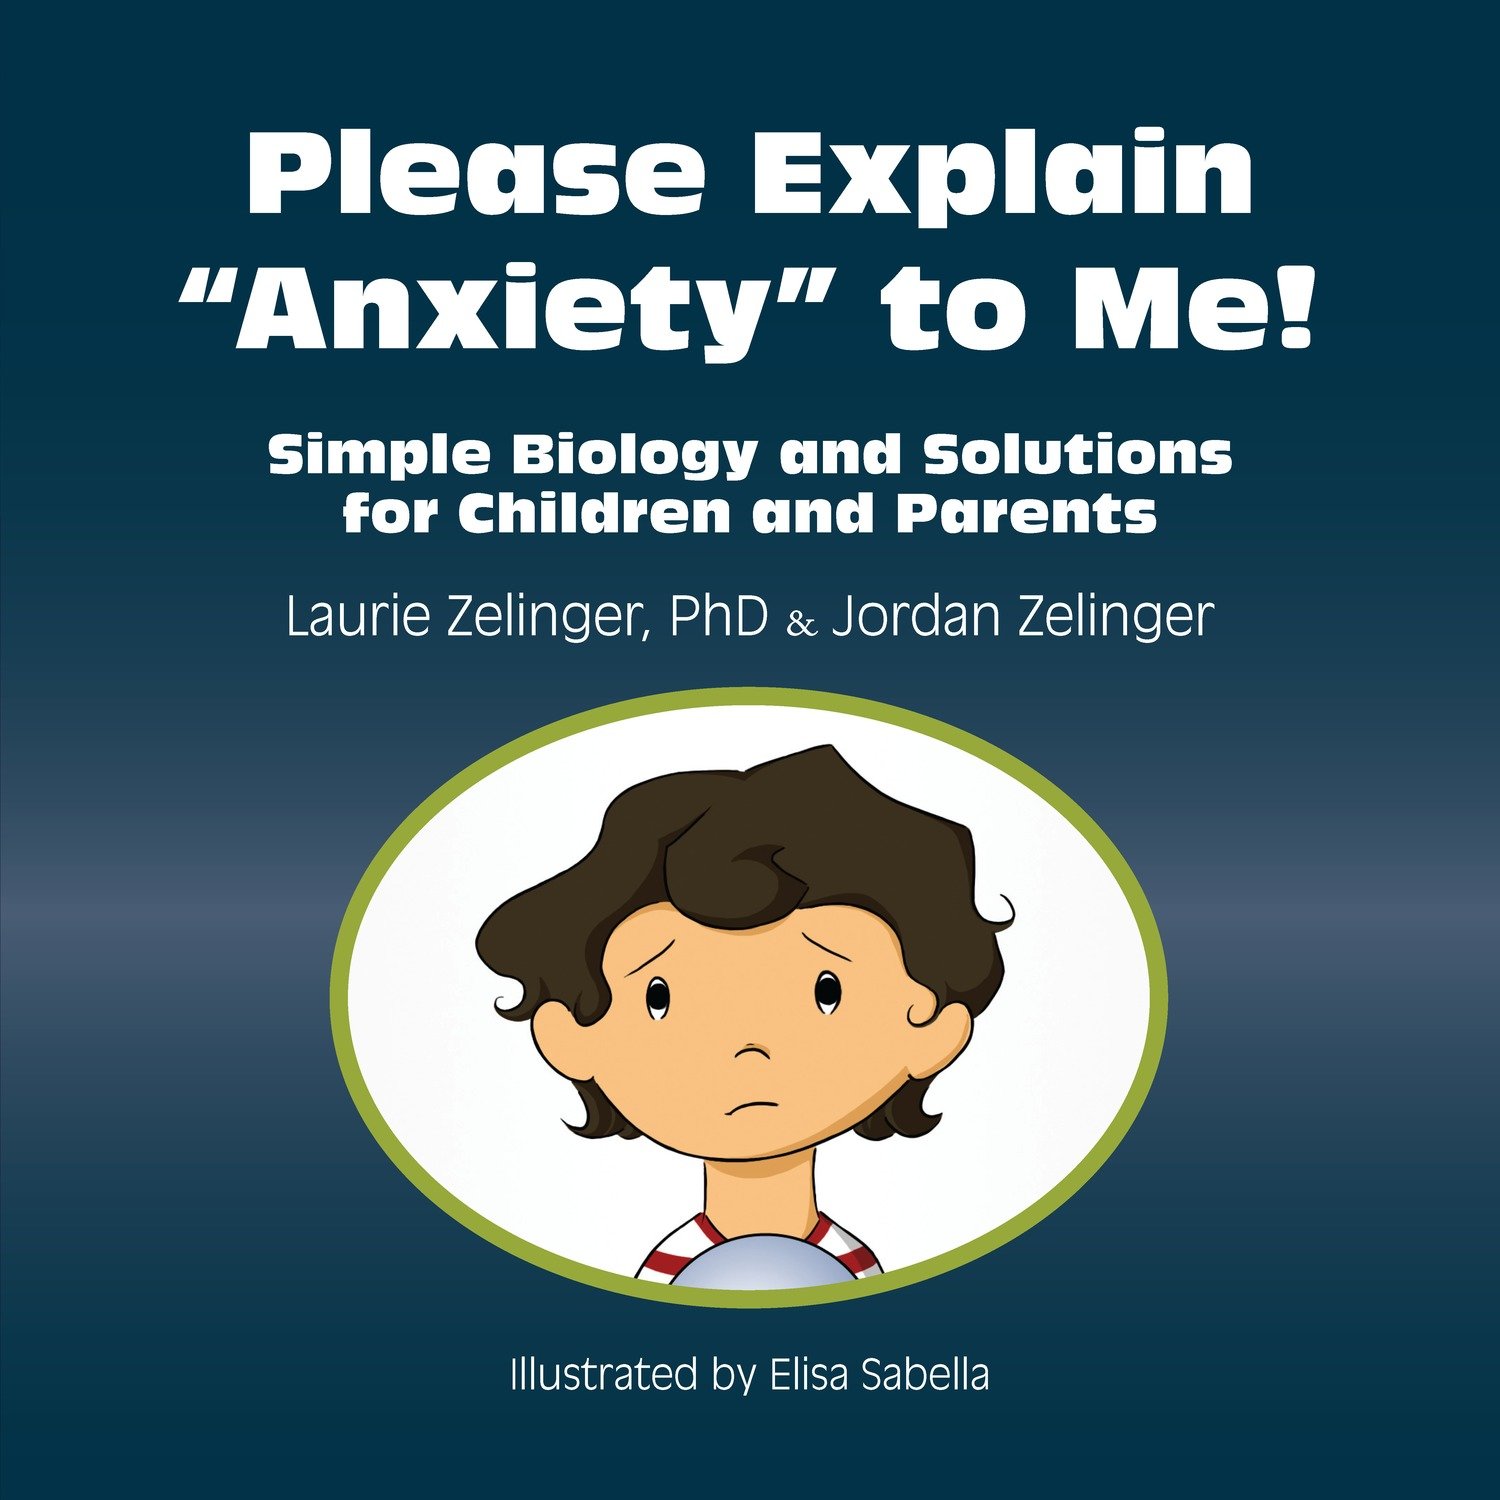 Please Explain Anxiety to Me!: Simple Biology and Solutions for Children and Parents